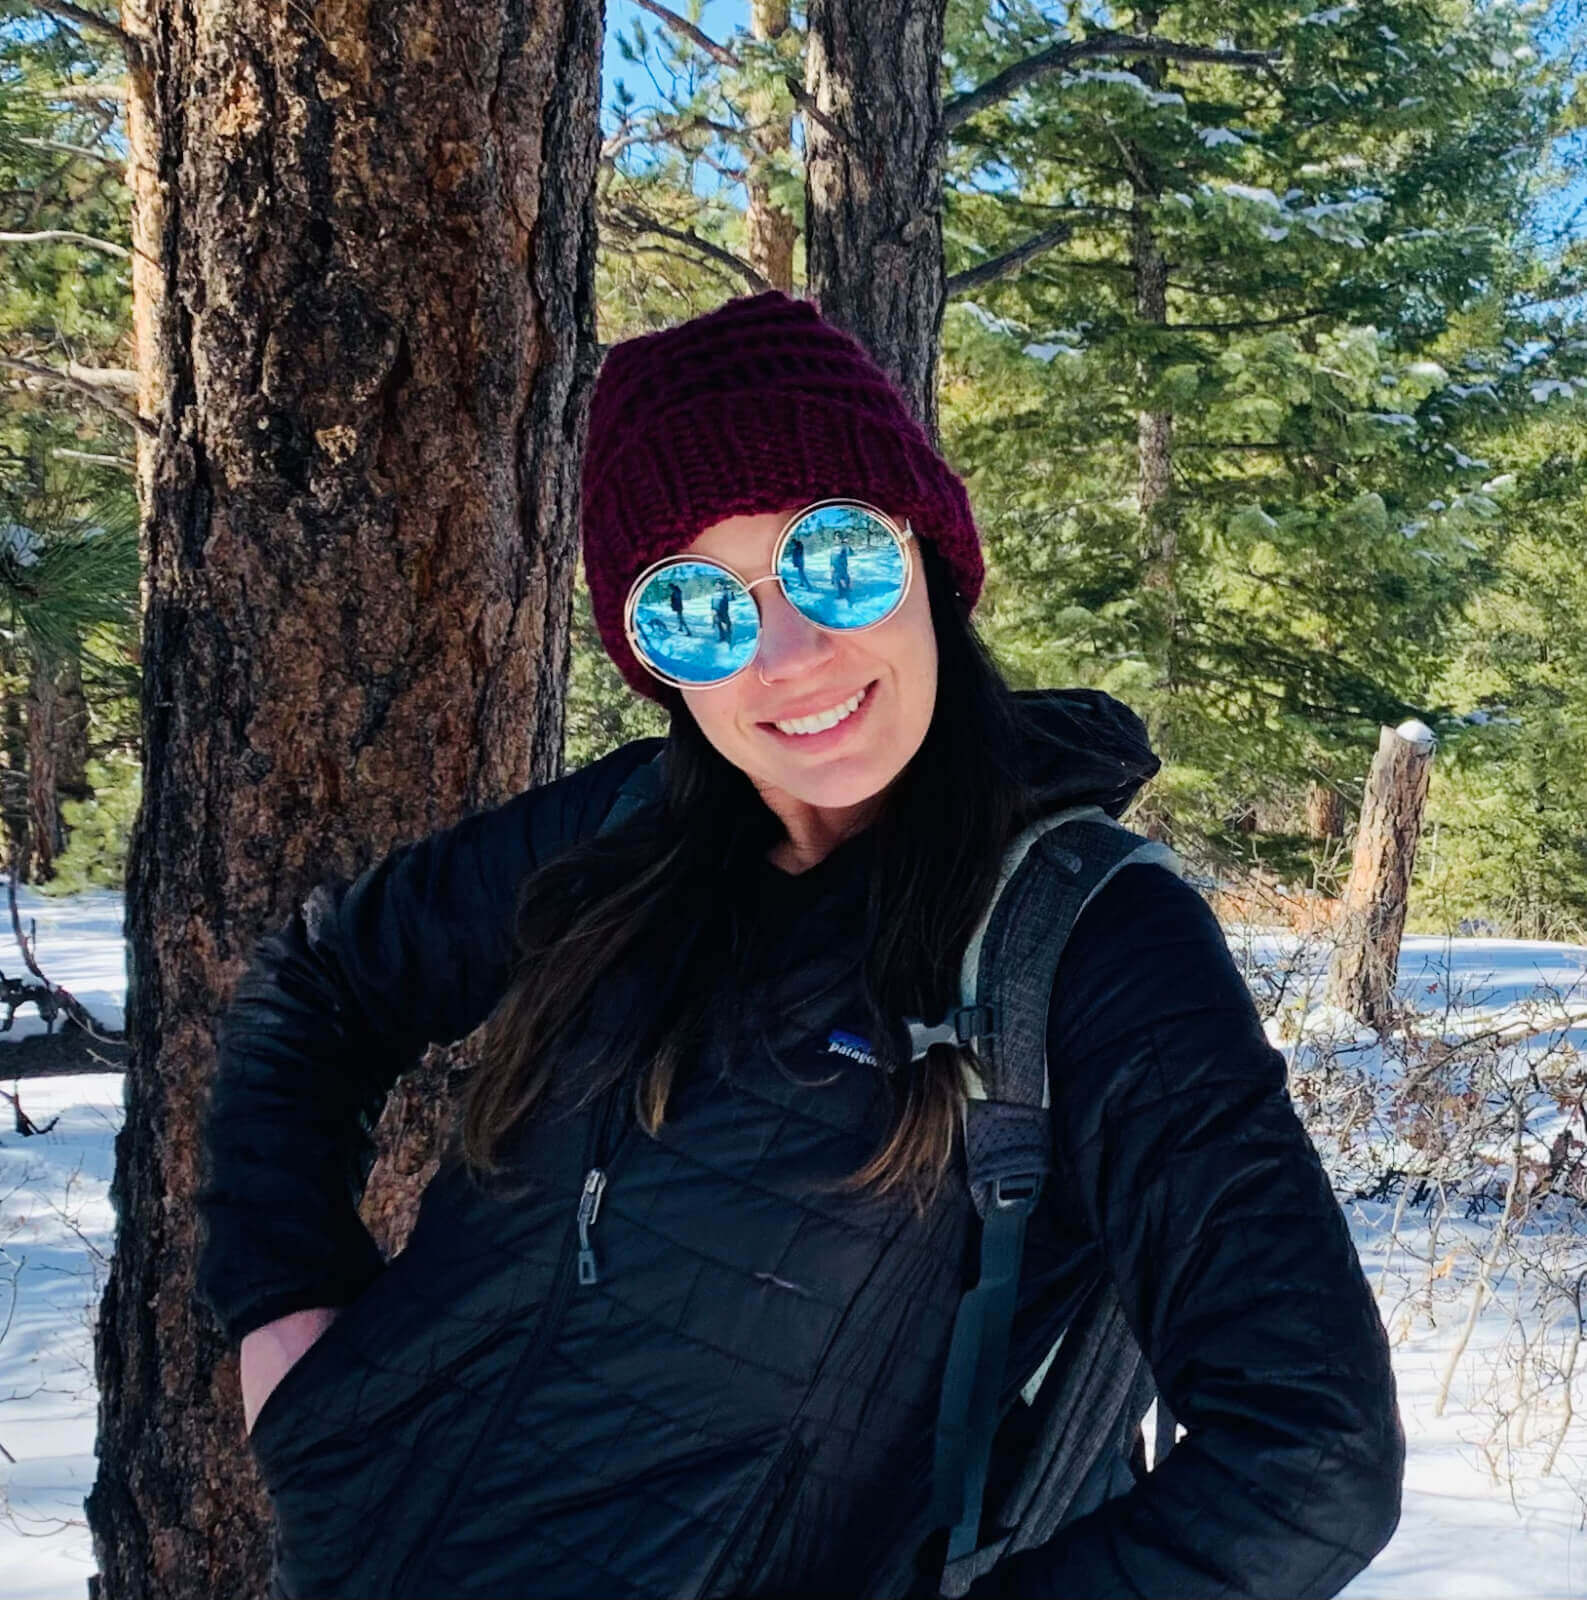 A woman leans against a tree wearing a coat, hat and circular mirror sunglasses in the forest carpeted with snow.